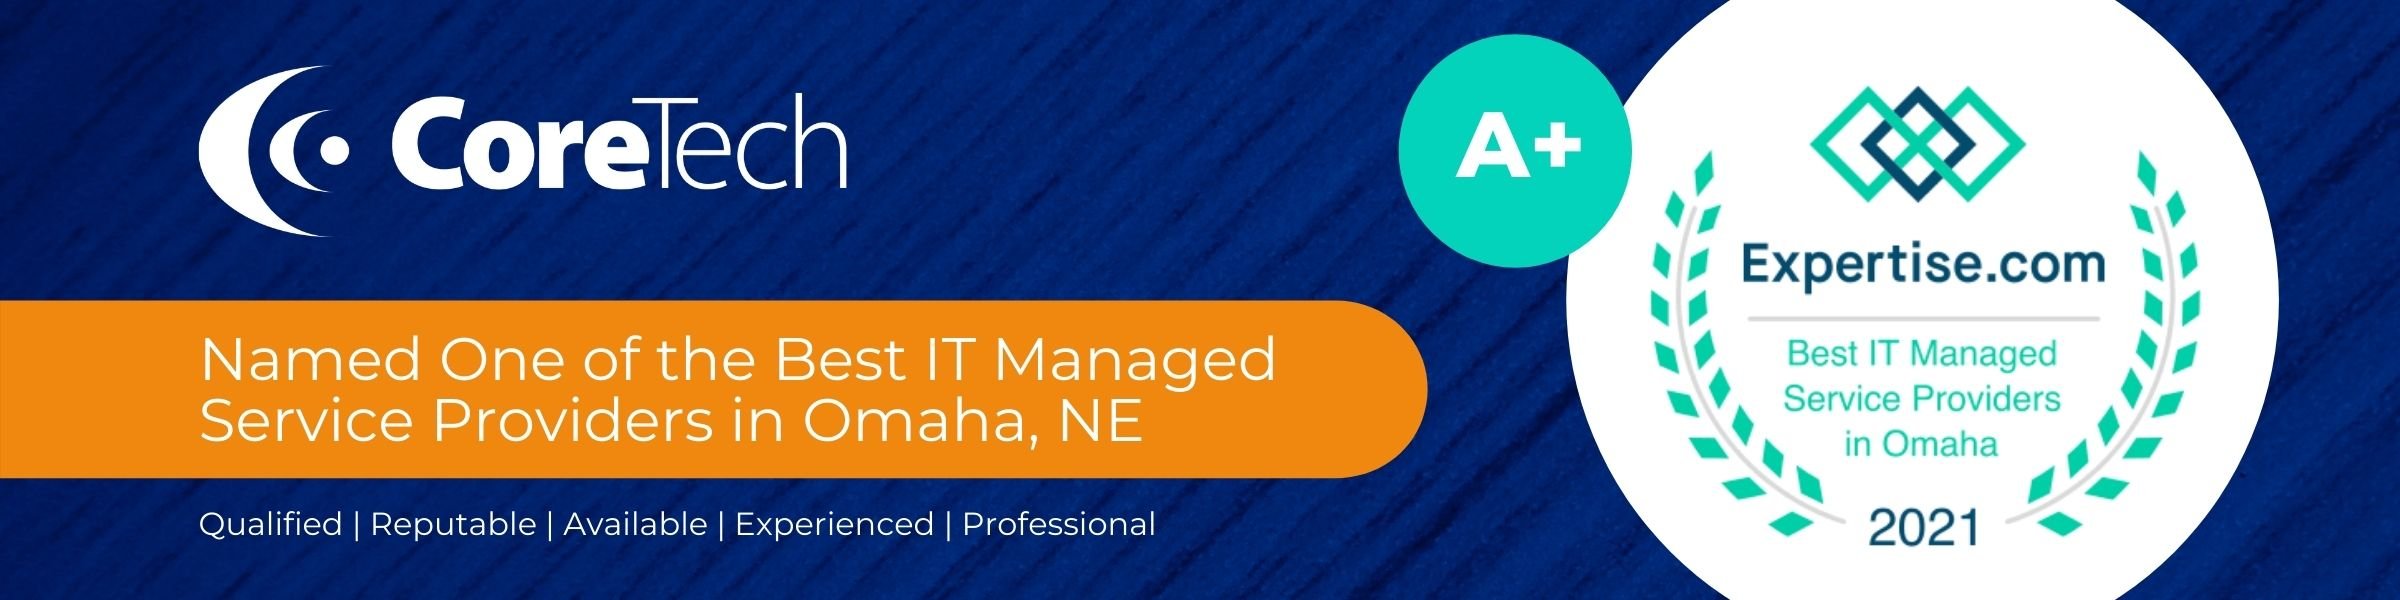 Named One of the Best Managed IT Service Providers in Omaha, NE